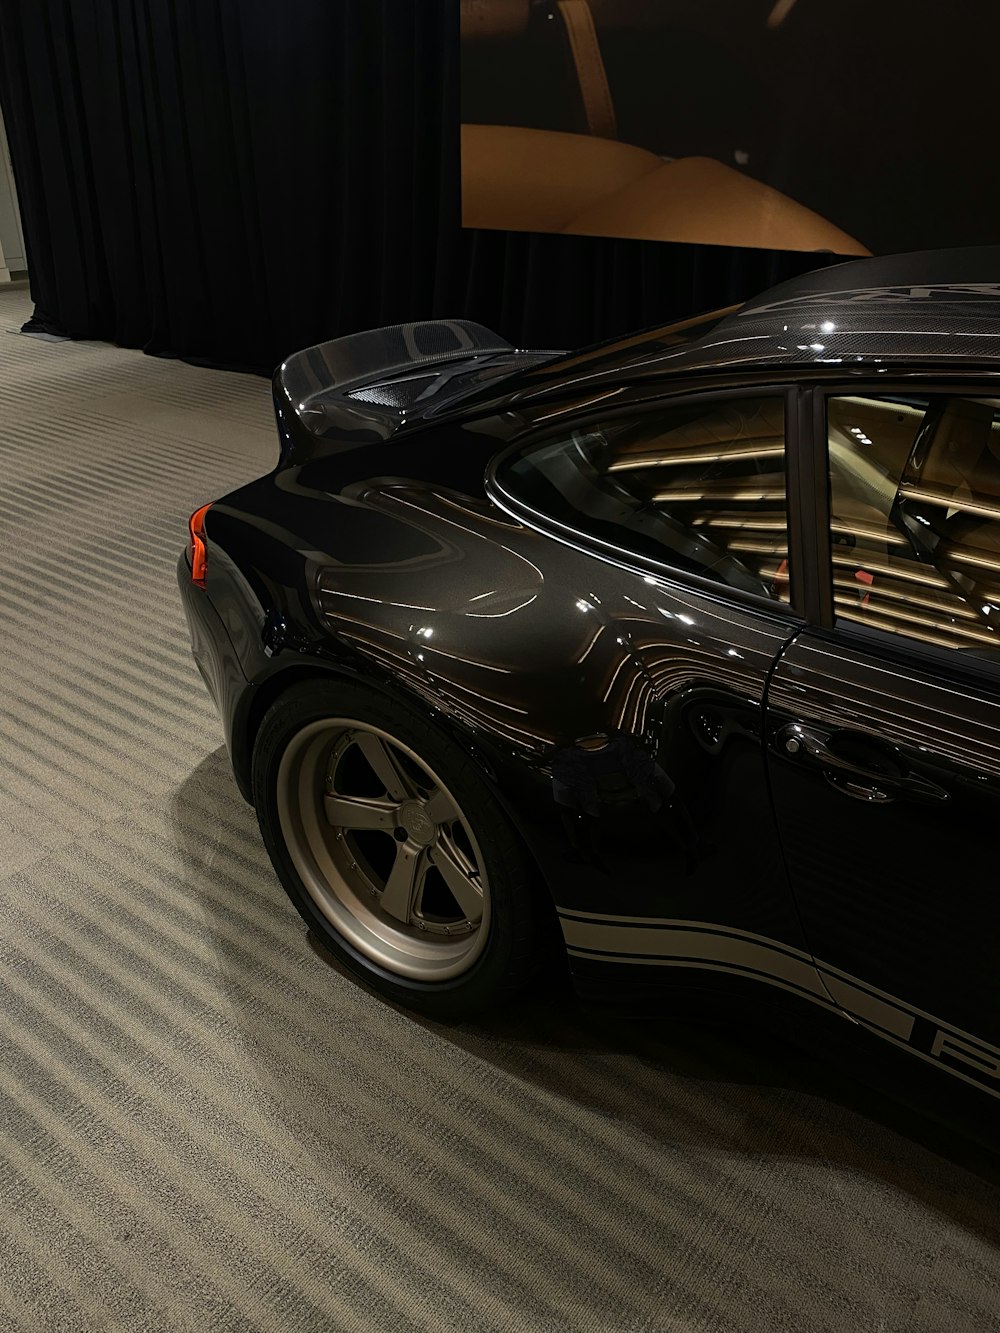 a black sports car parked in a showroom